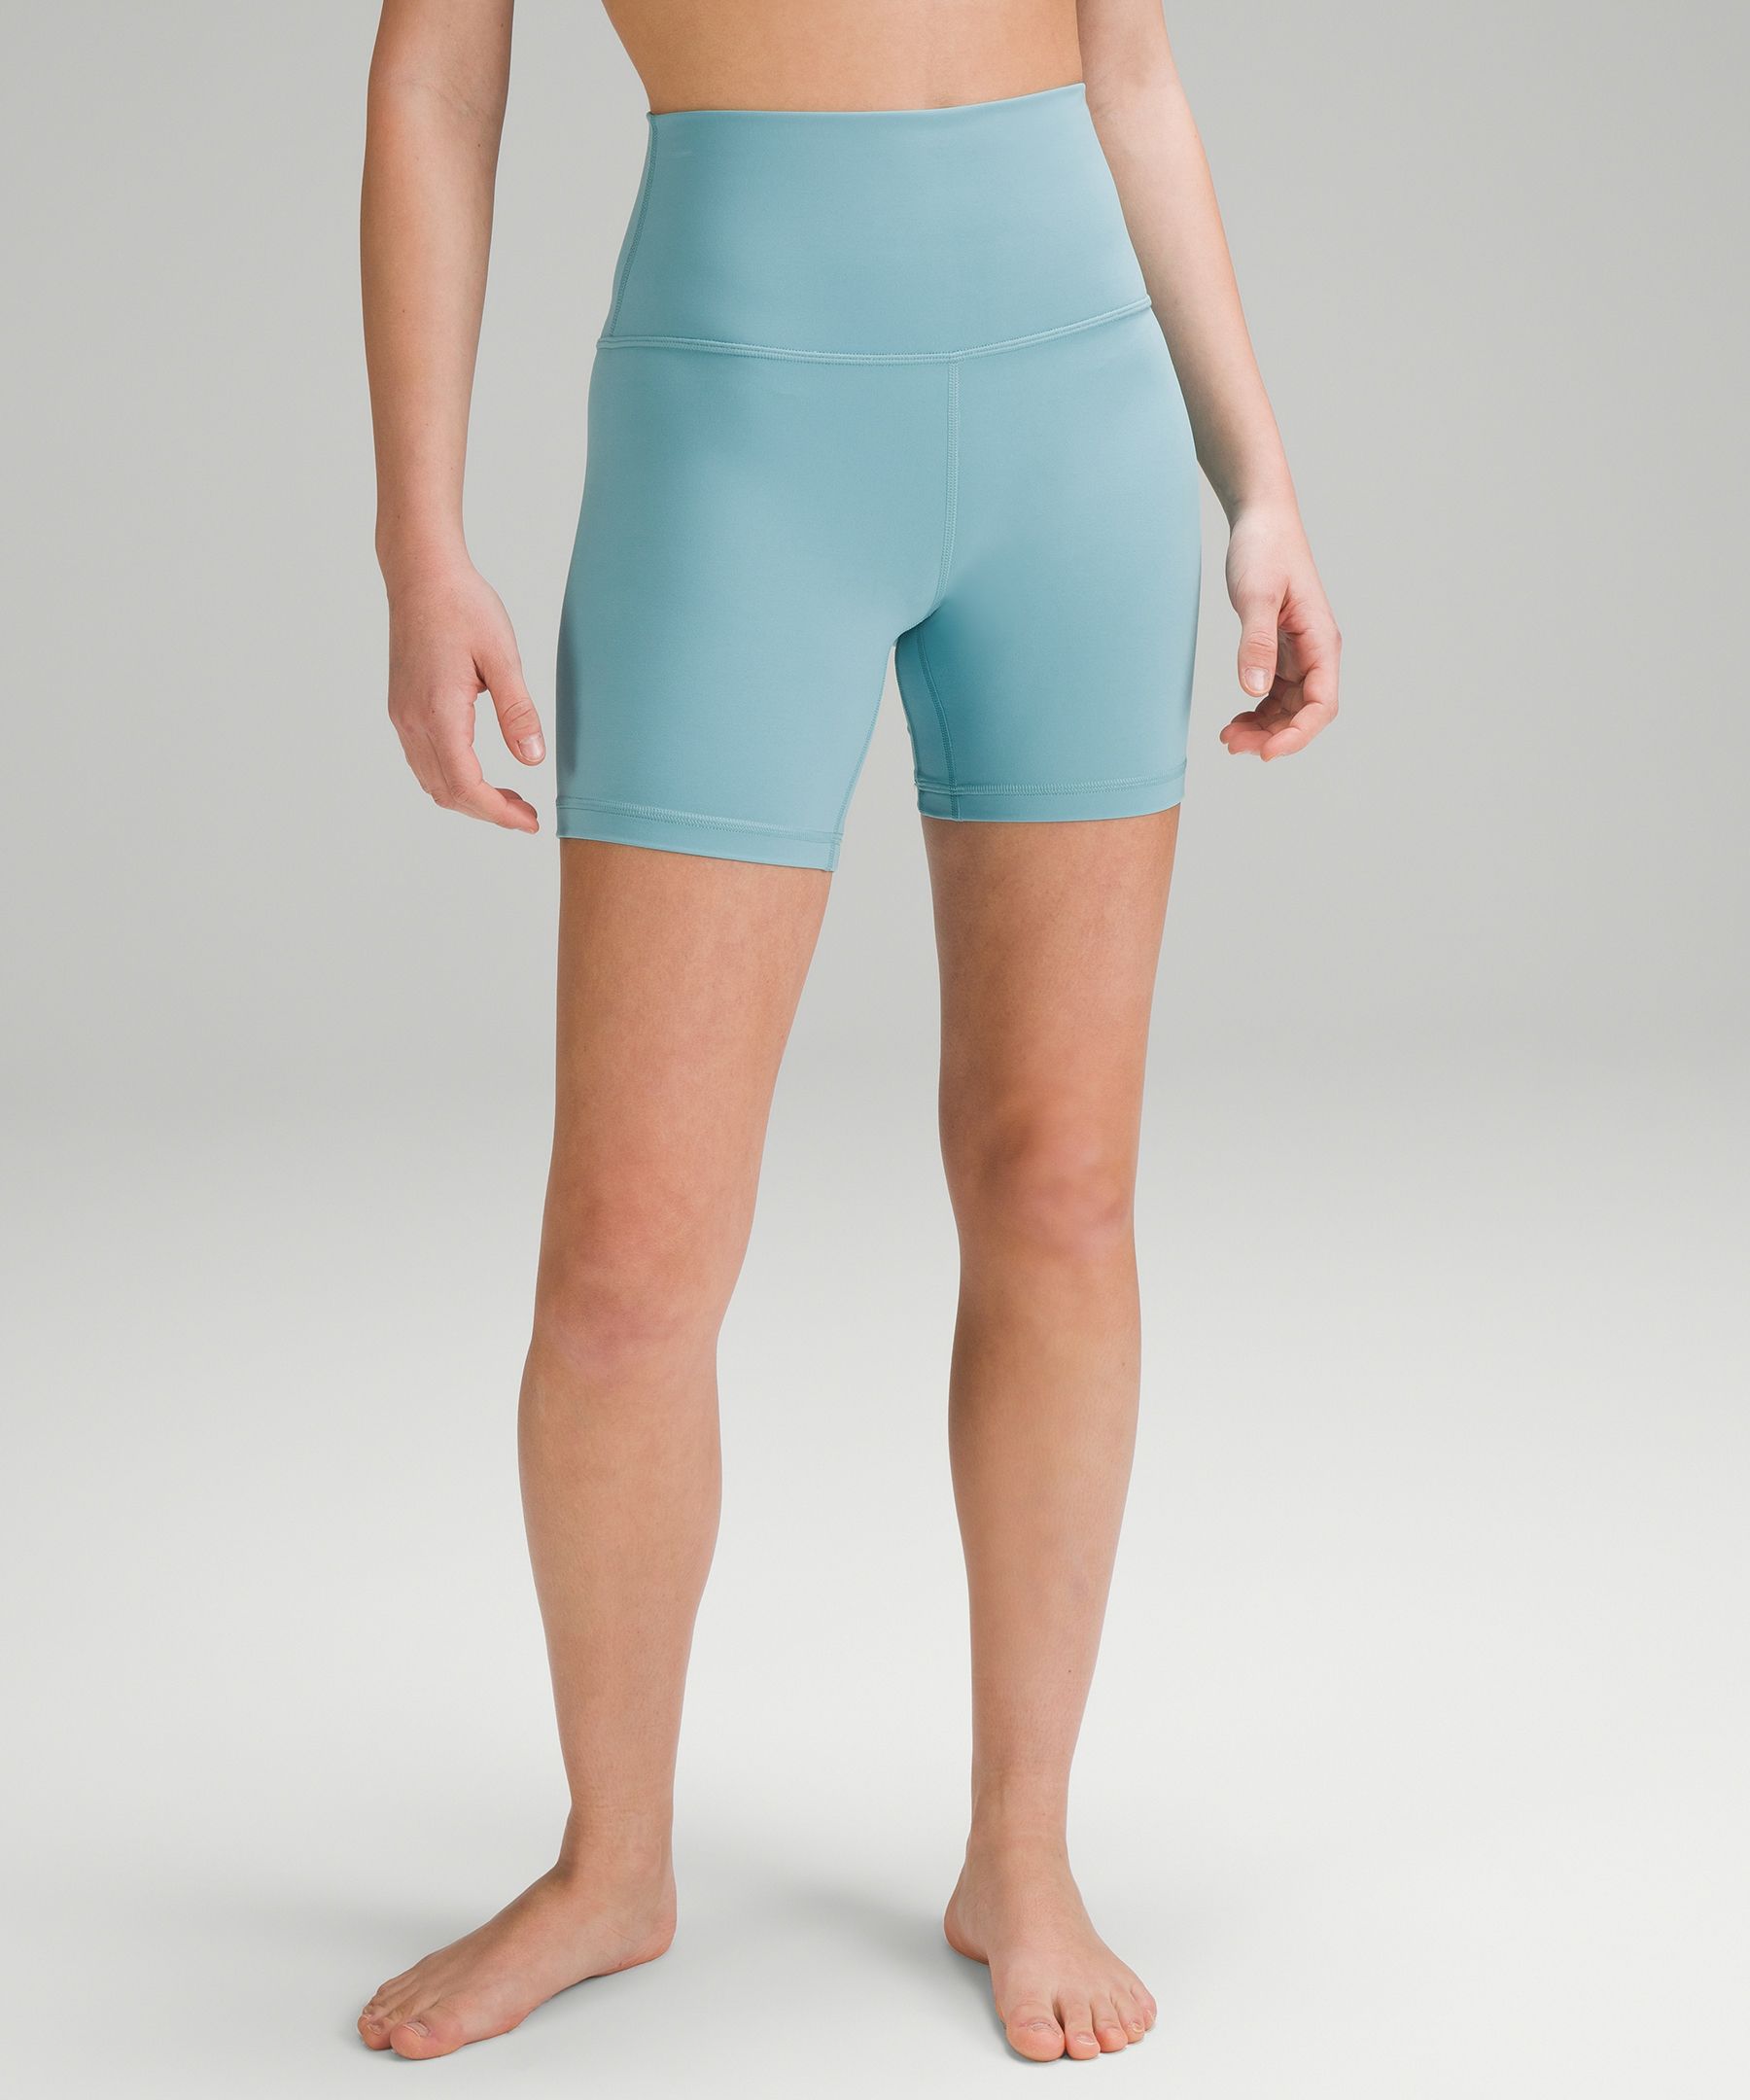 Lululemon align Shorts 4” size 6 Black - $50 (28% Off Retail) - From